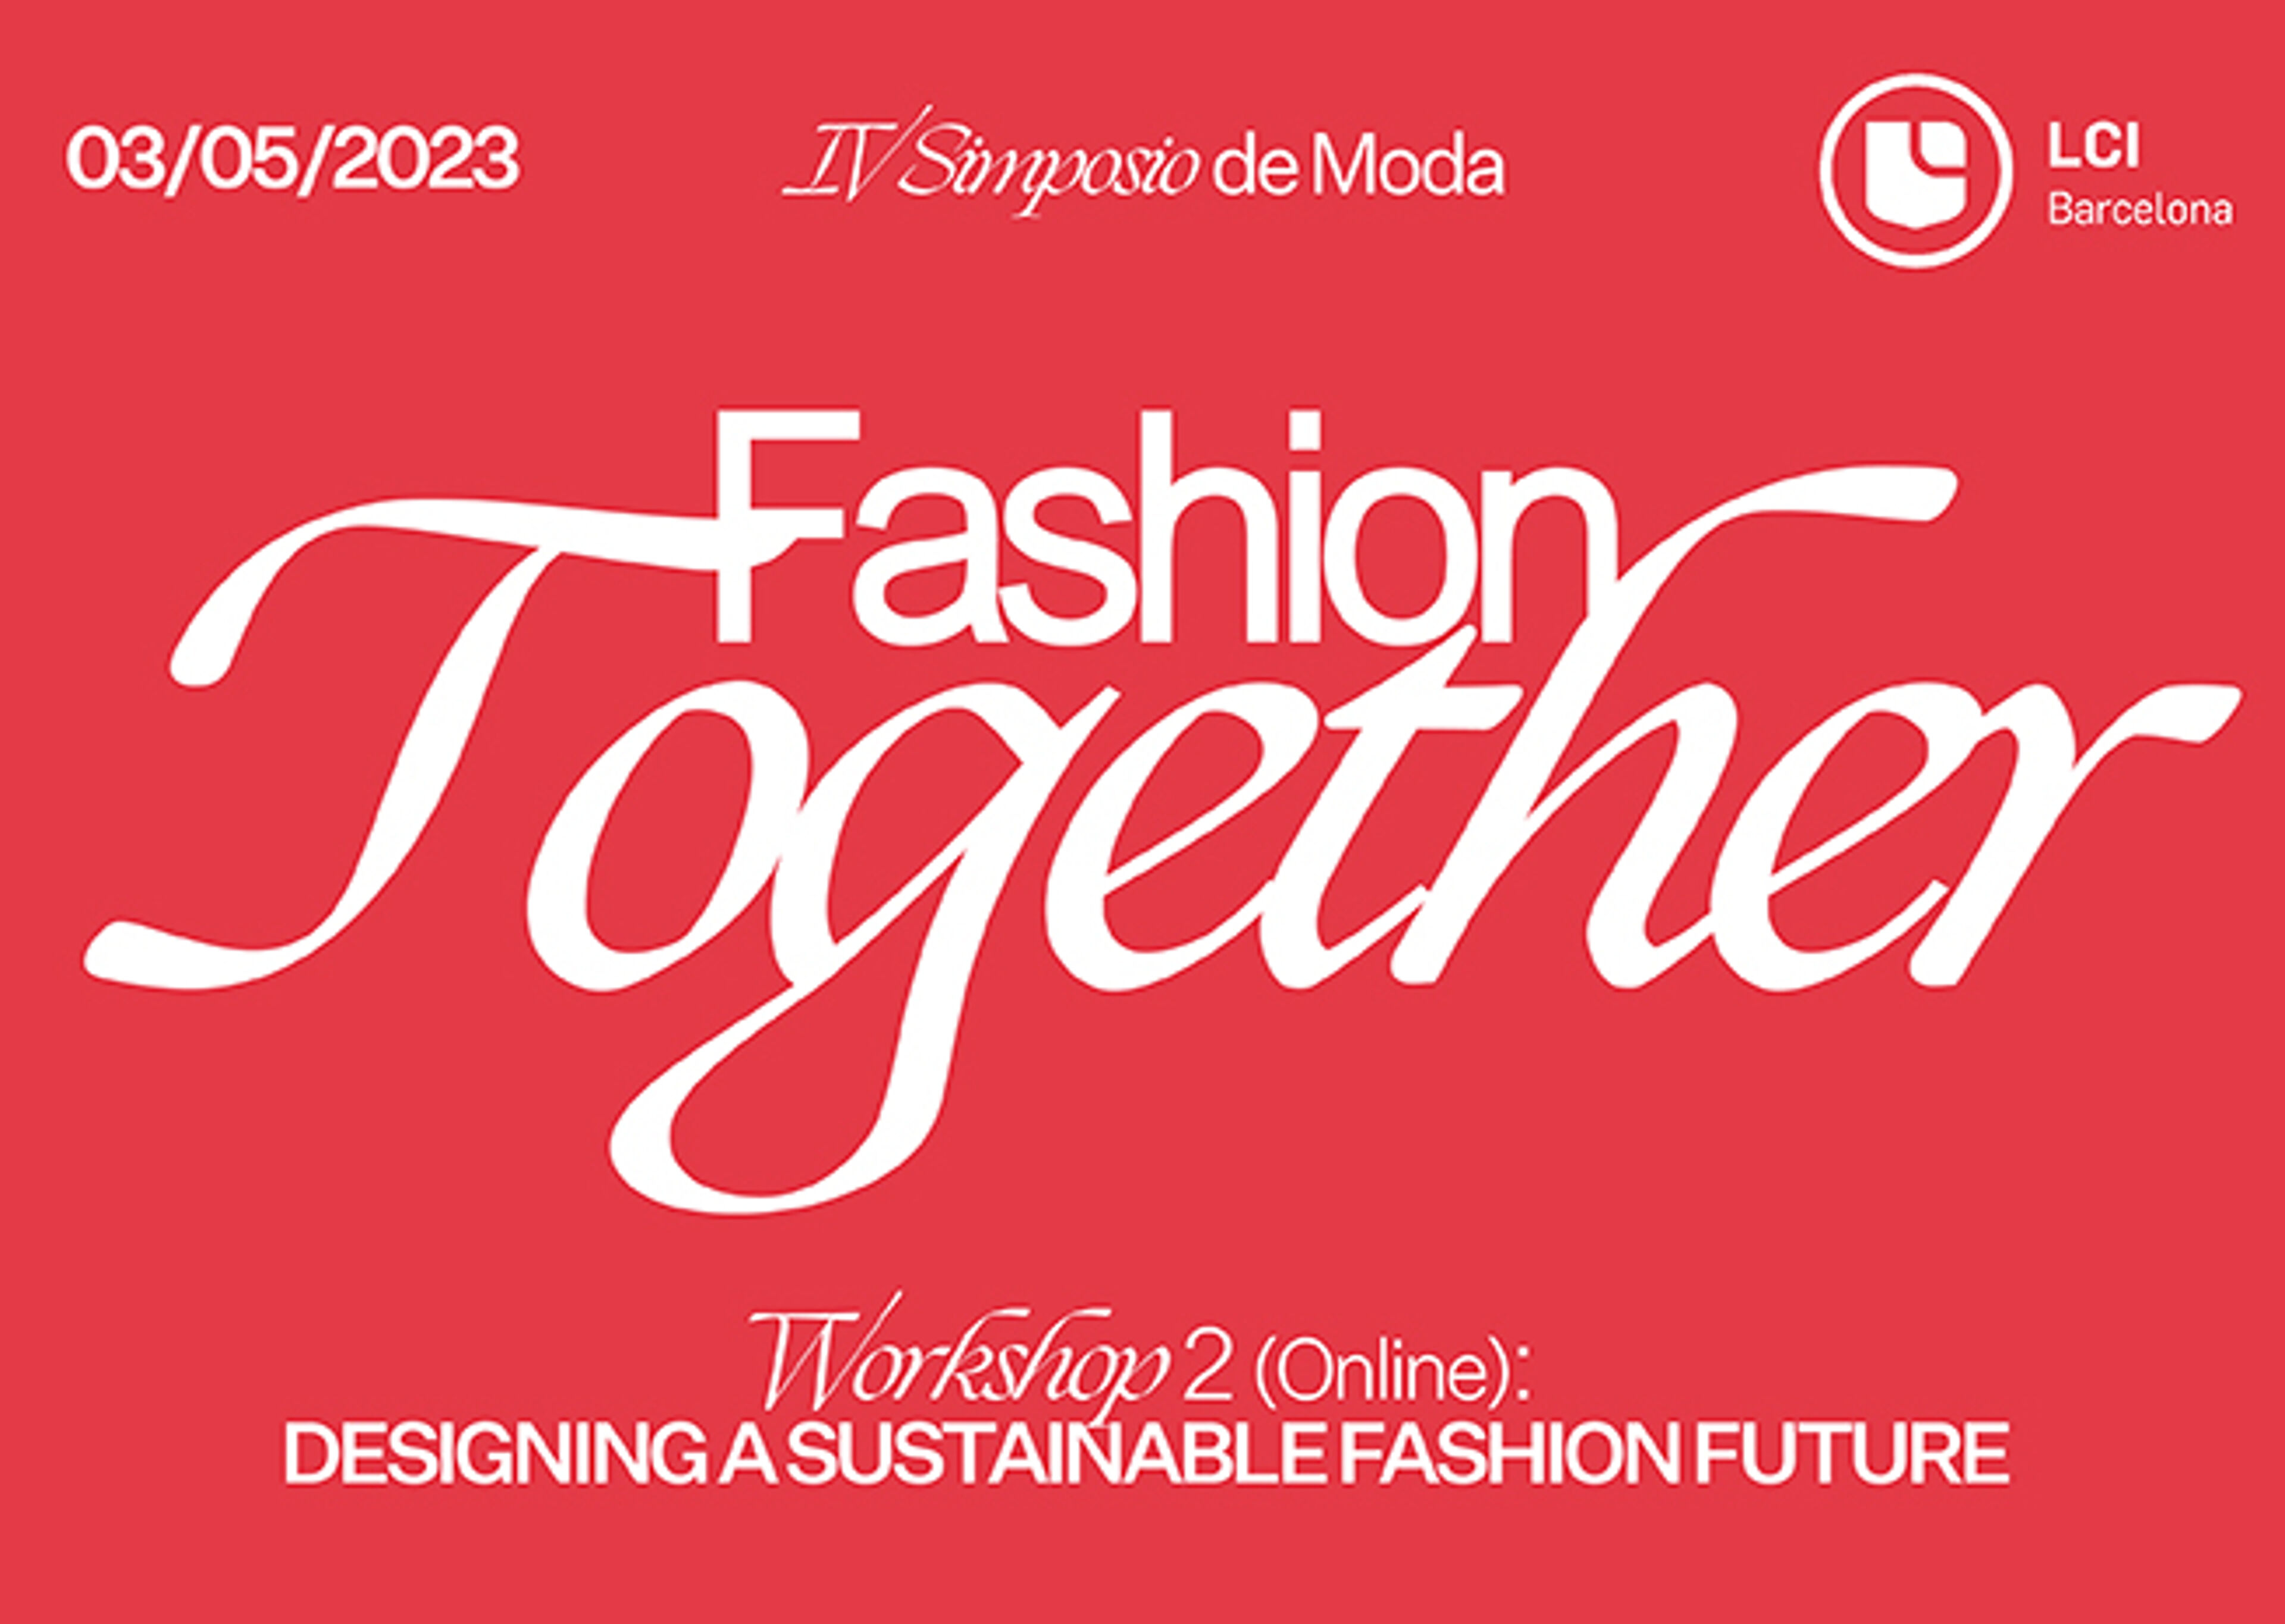 Workshop 2 poster for the online segment of 'Fashion Together' symposium on May 3, 2023, on designing a sustainable fashion future.